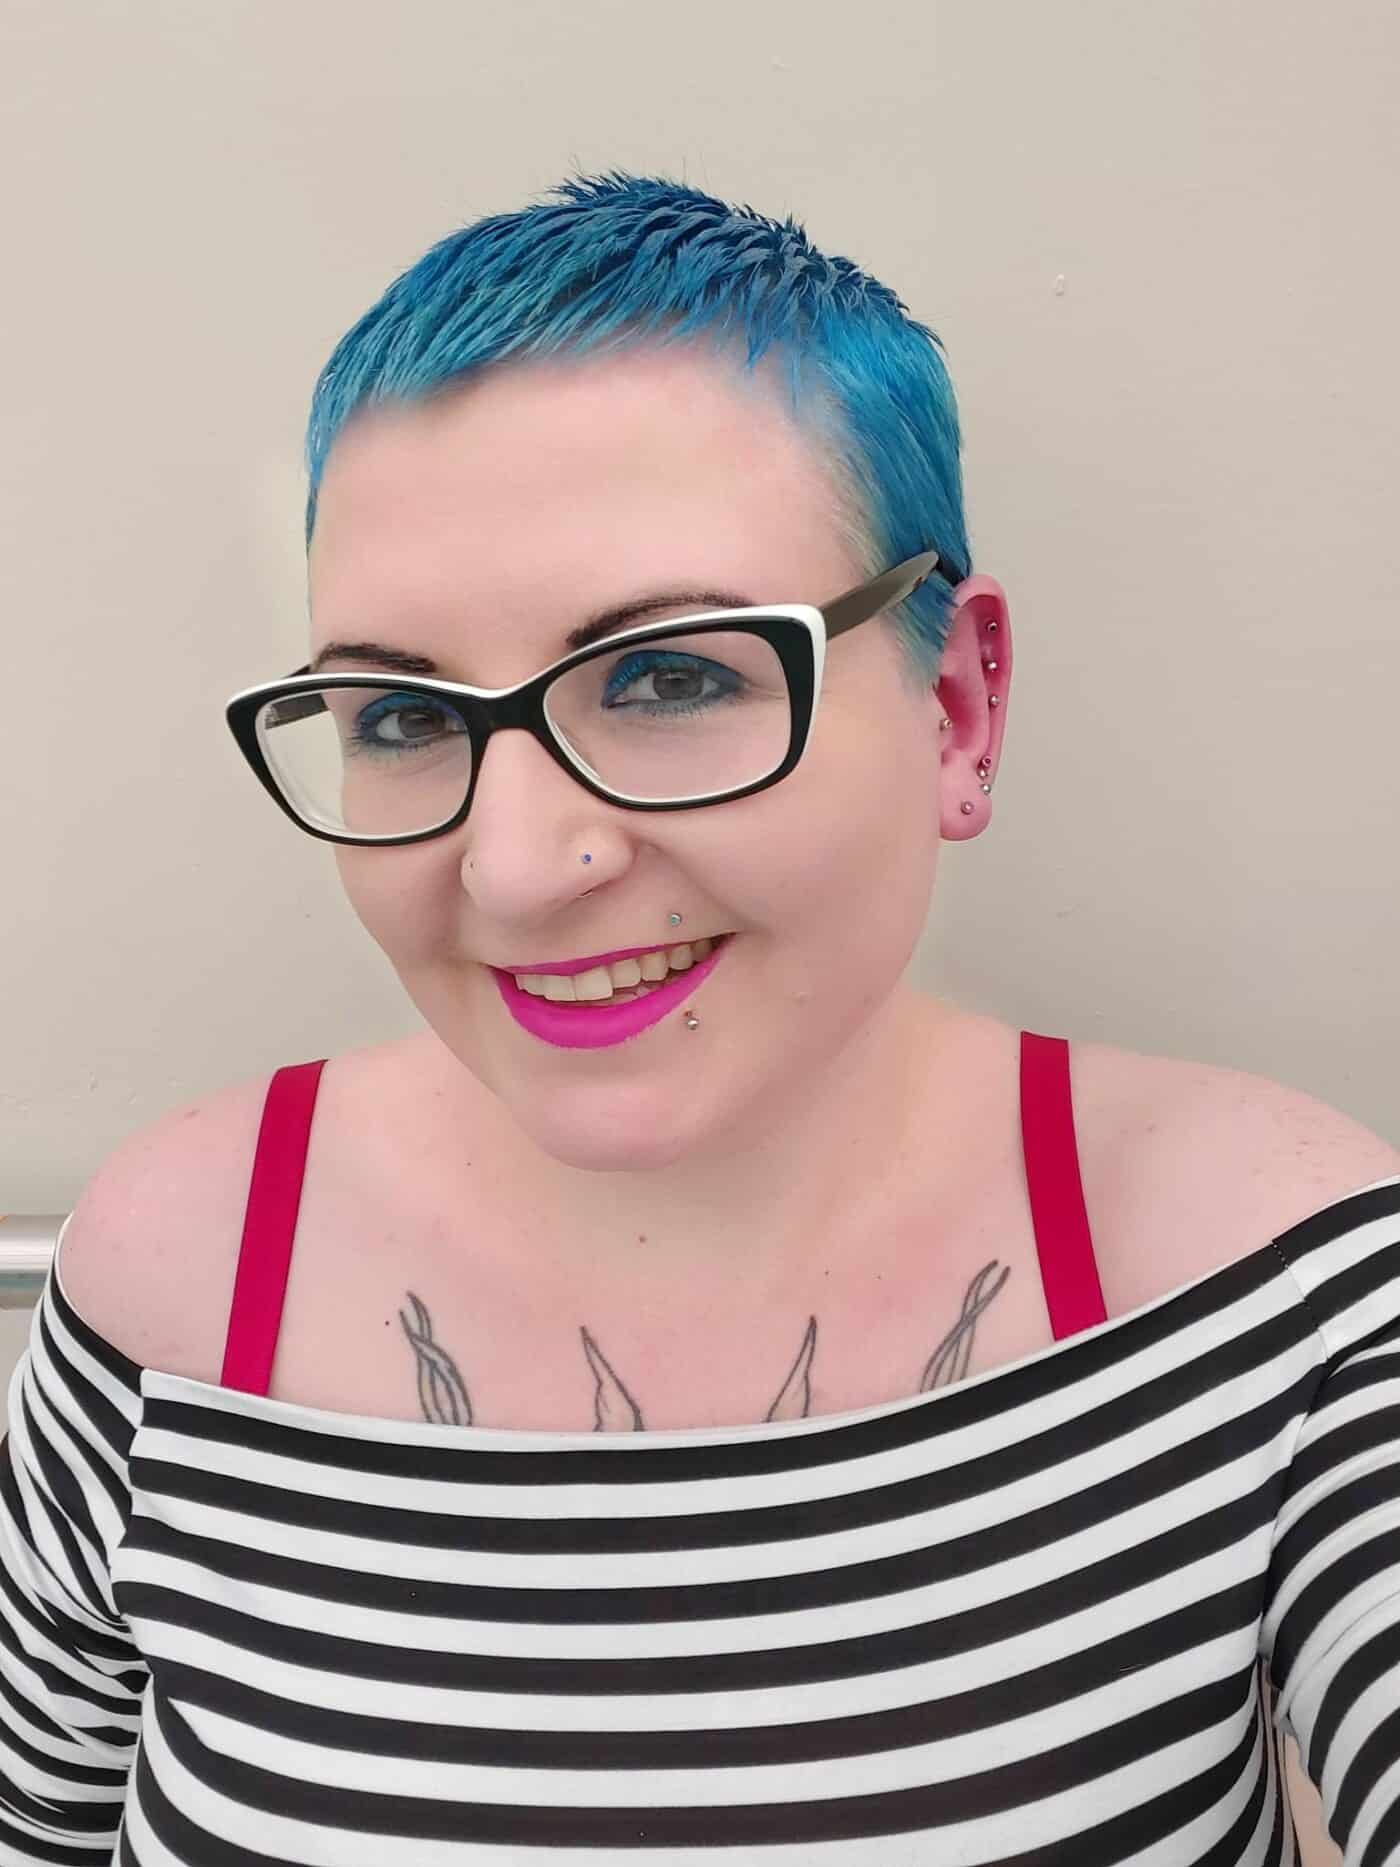 Gemma Lees. A white woman with short, blue hair, black plastic-rimmed glasses and pink lipstick, wearing a black and white stripy top.